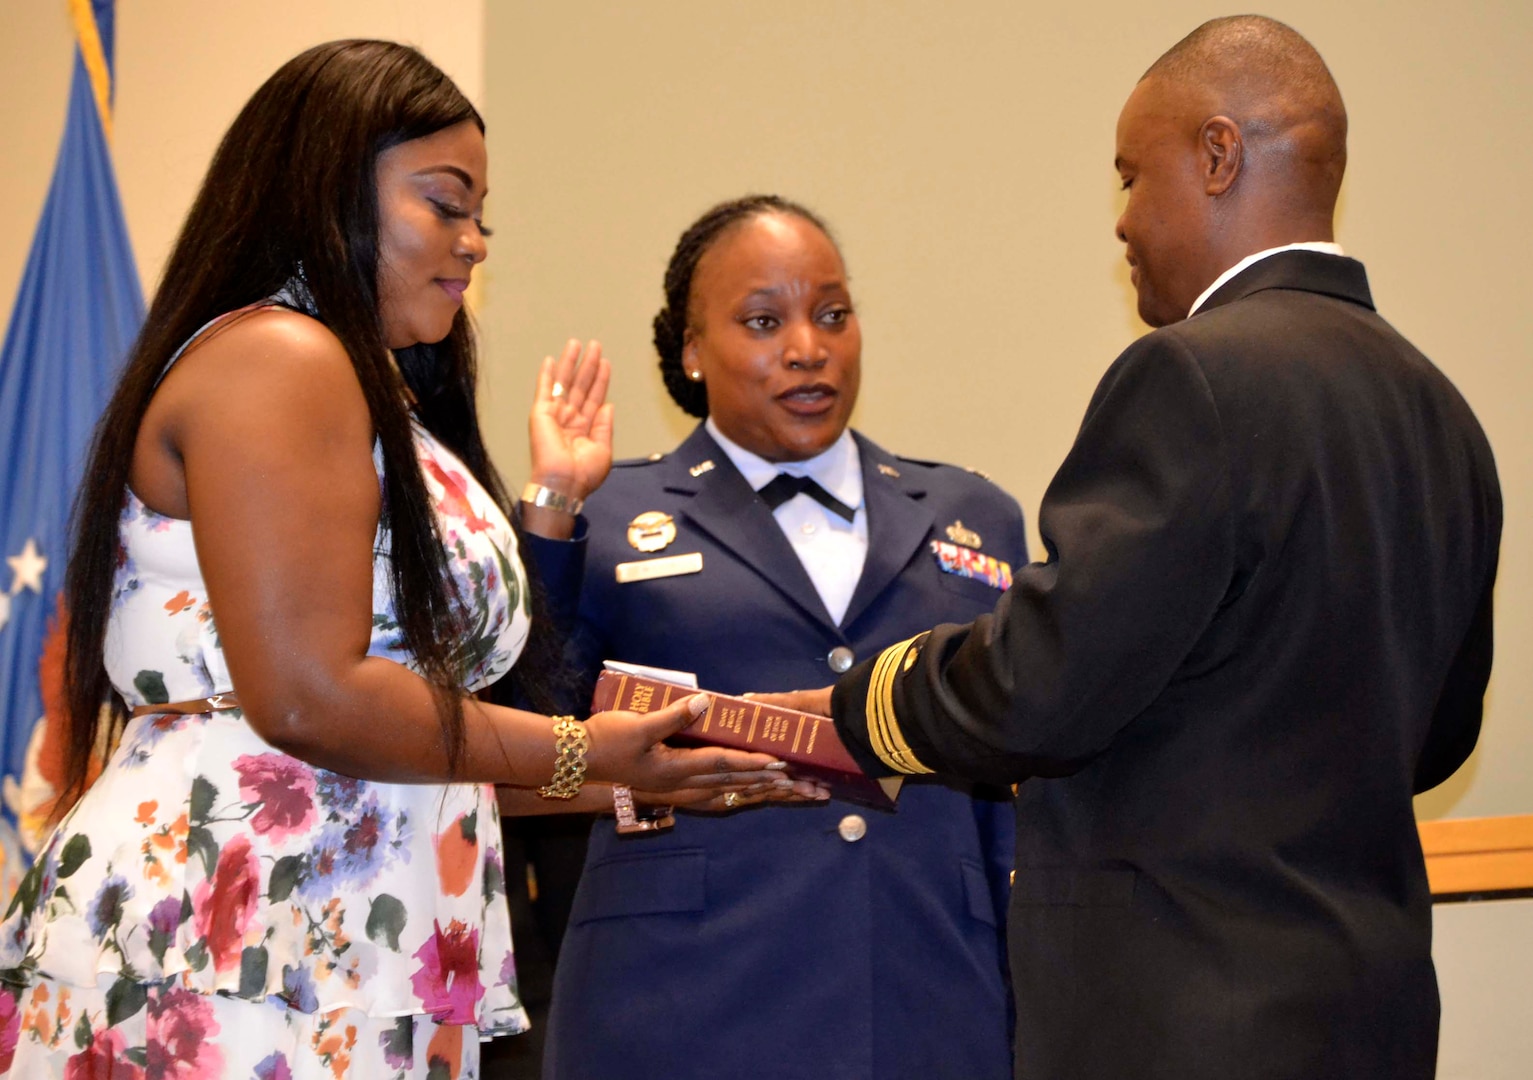 Naomi Tailey, left, wife of Navy Lt. Cmdr. Prince Tailey, right, stands beside Air Force Lt. Col. Chiriga Wilson, center, holding the Bible on which her husband reaffirms his oath of service during a promotion ceremony in his honor November 22, 2019, in Philadelphia.